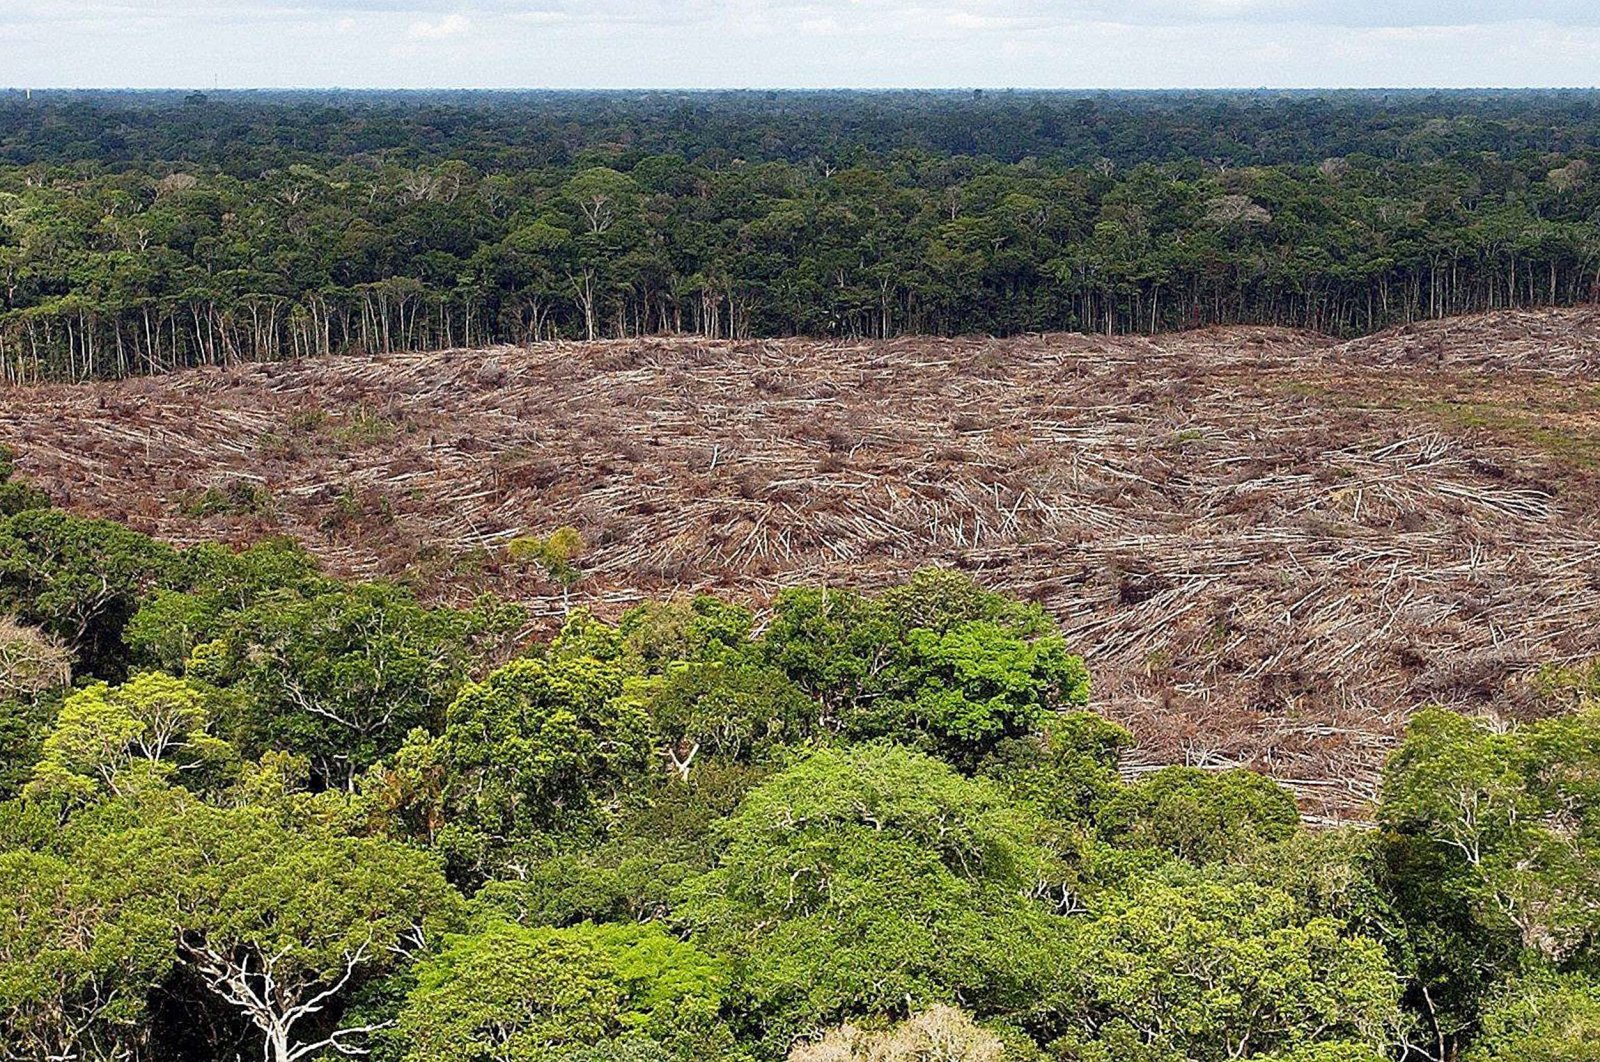 A picture made available on Aug. 14, 2019, shows a deforested area in the Amazon rainforest in Brazil, Nov. 28, 2013. (EPA Photo)